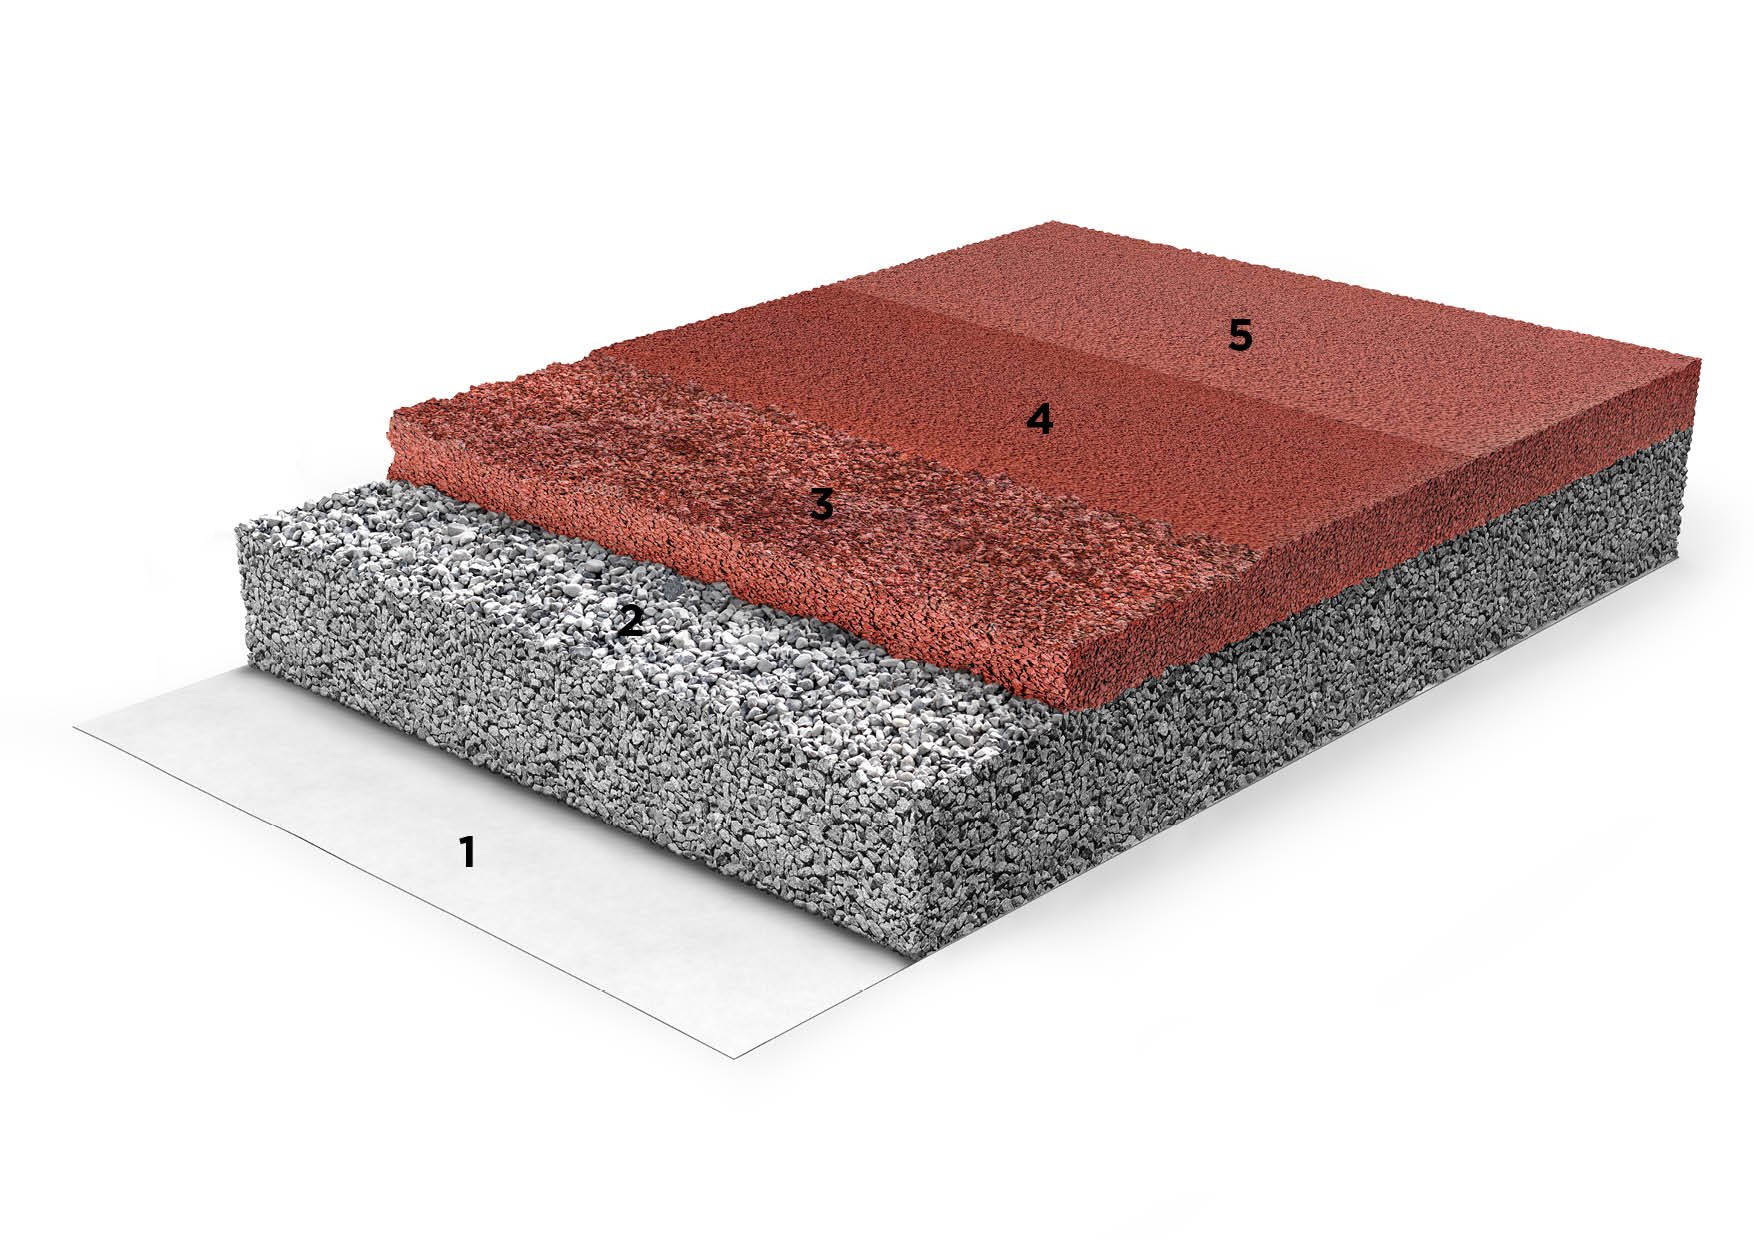 Render of the outdoor permeable concrete pavement